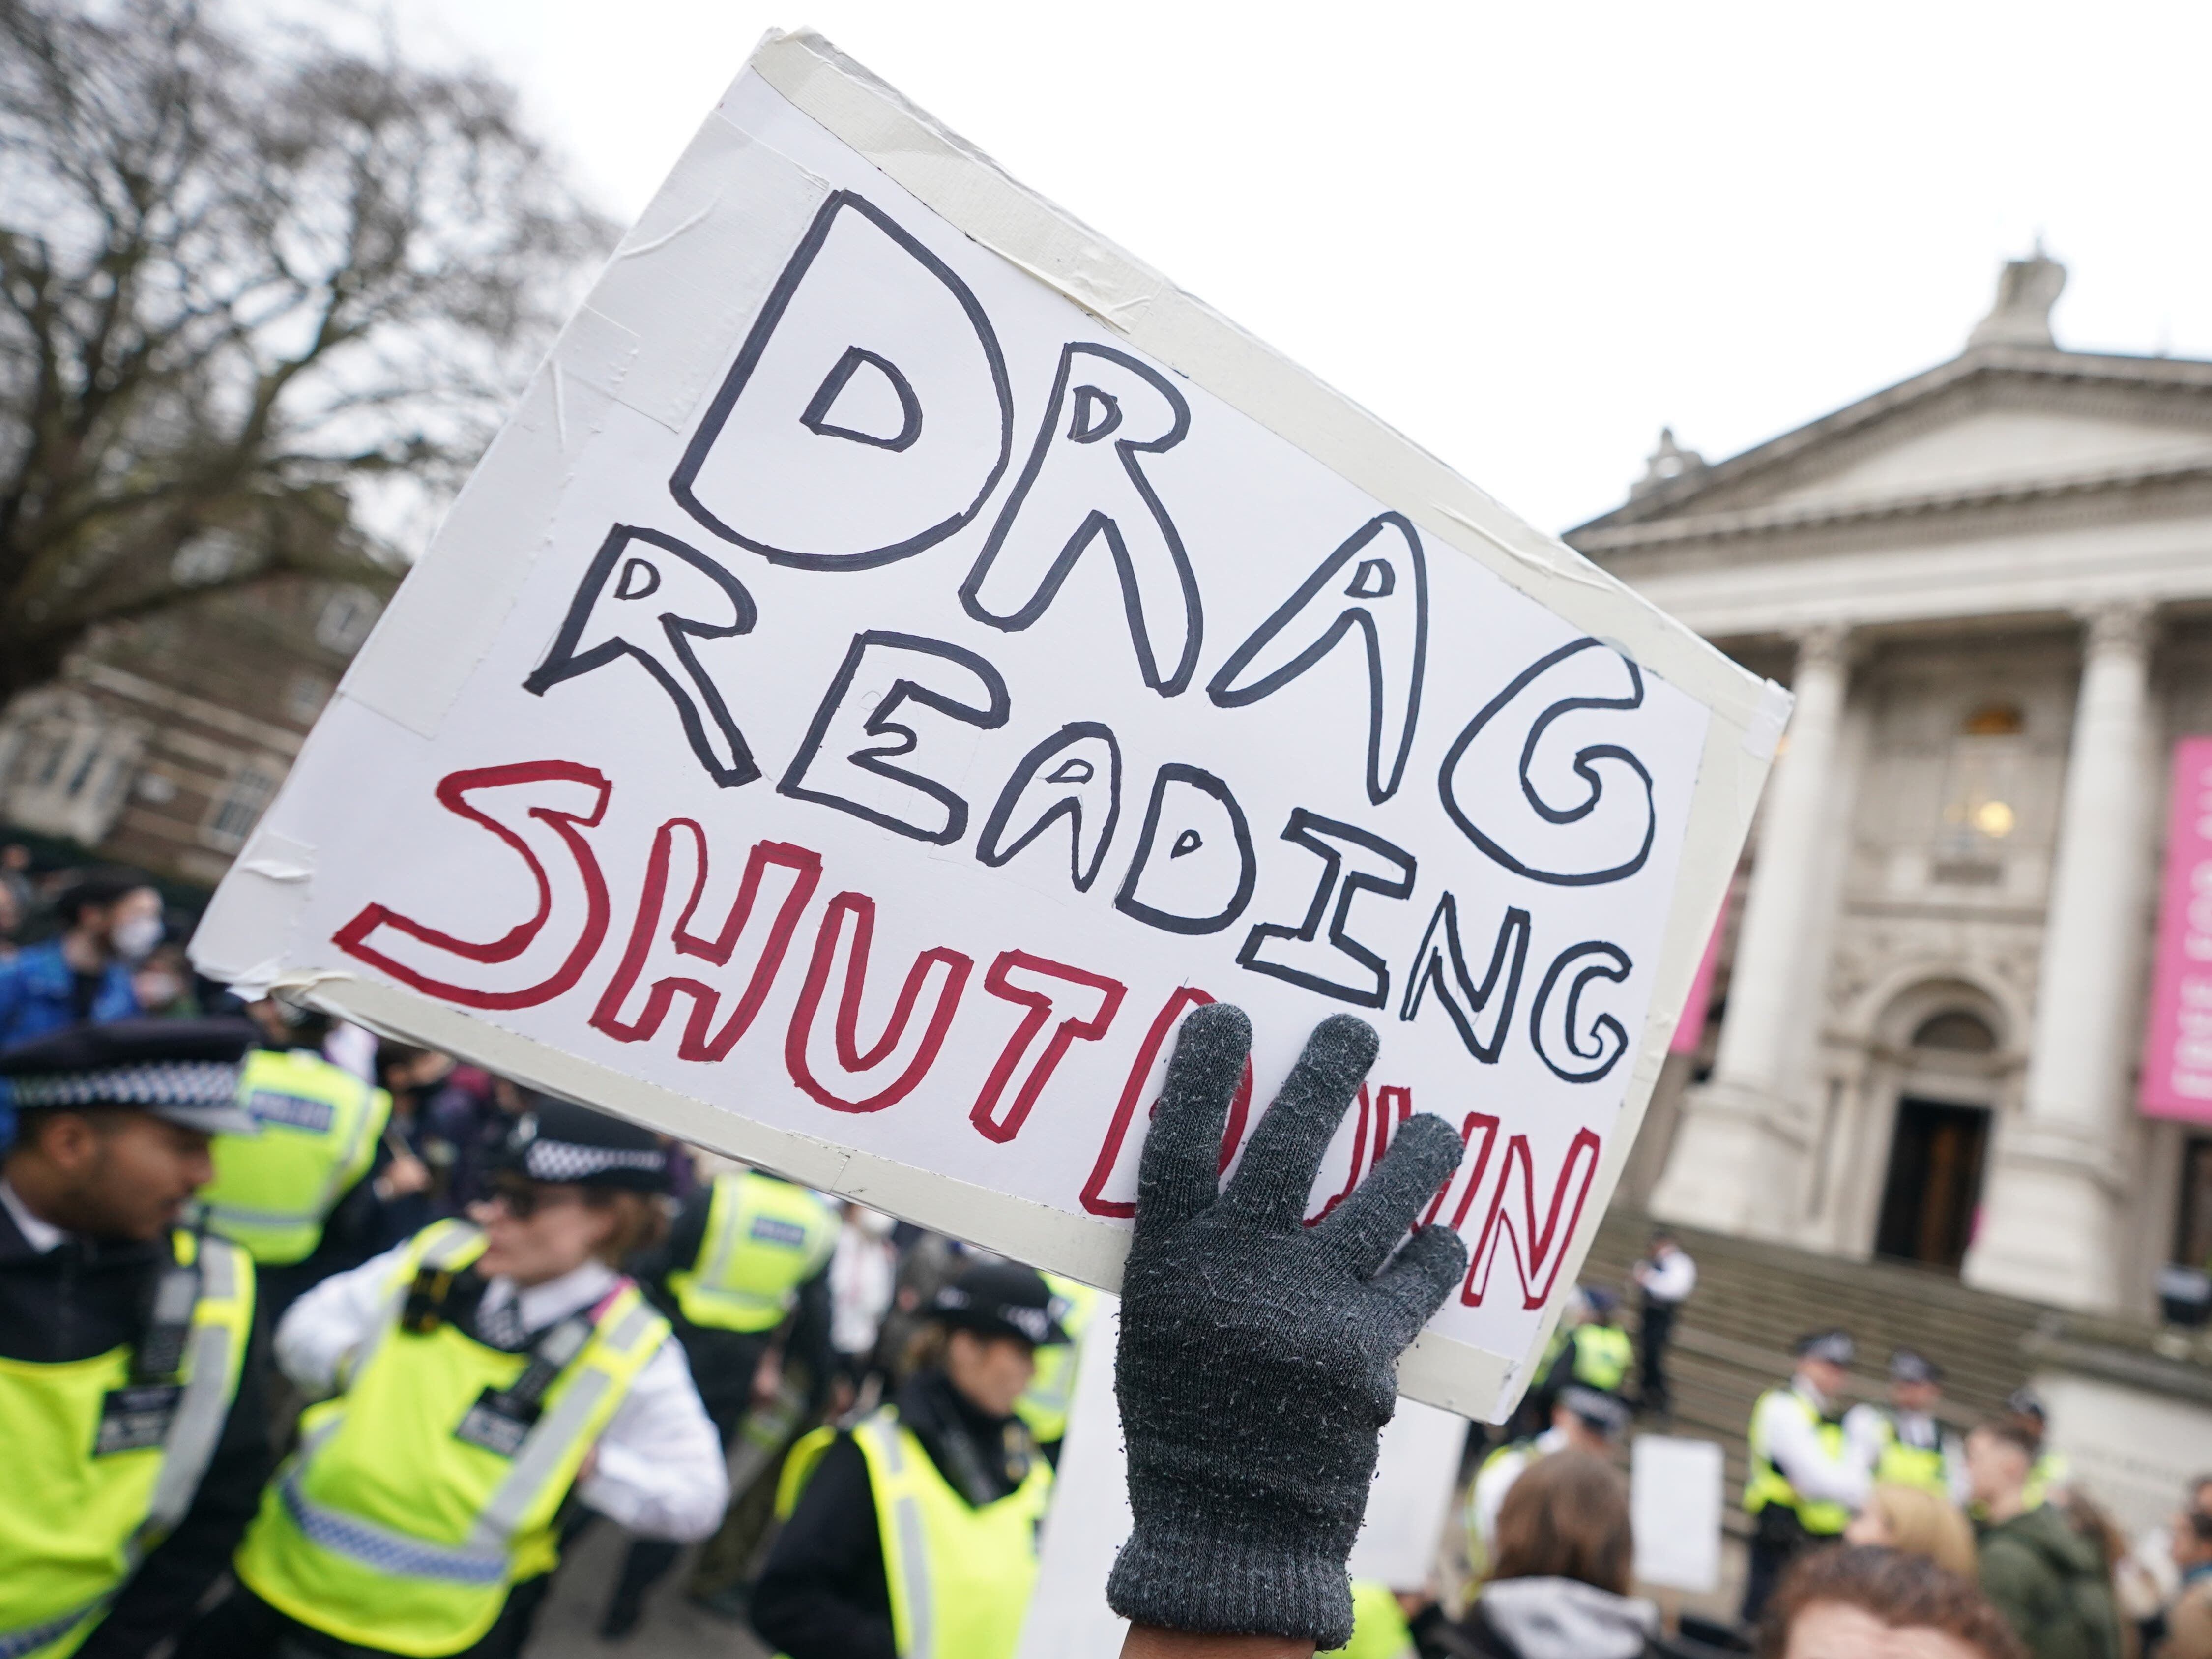 Man denies public order offence after Tate Britain drag queen story time protest